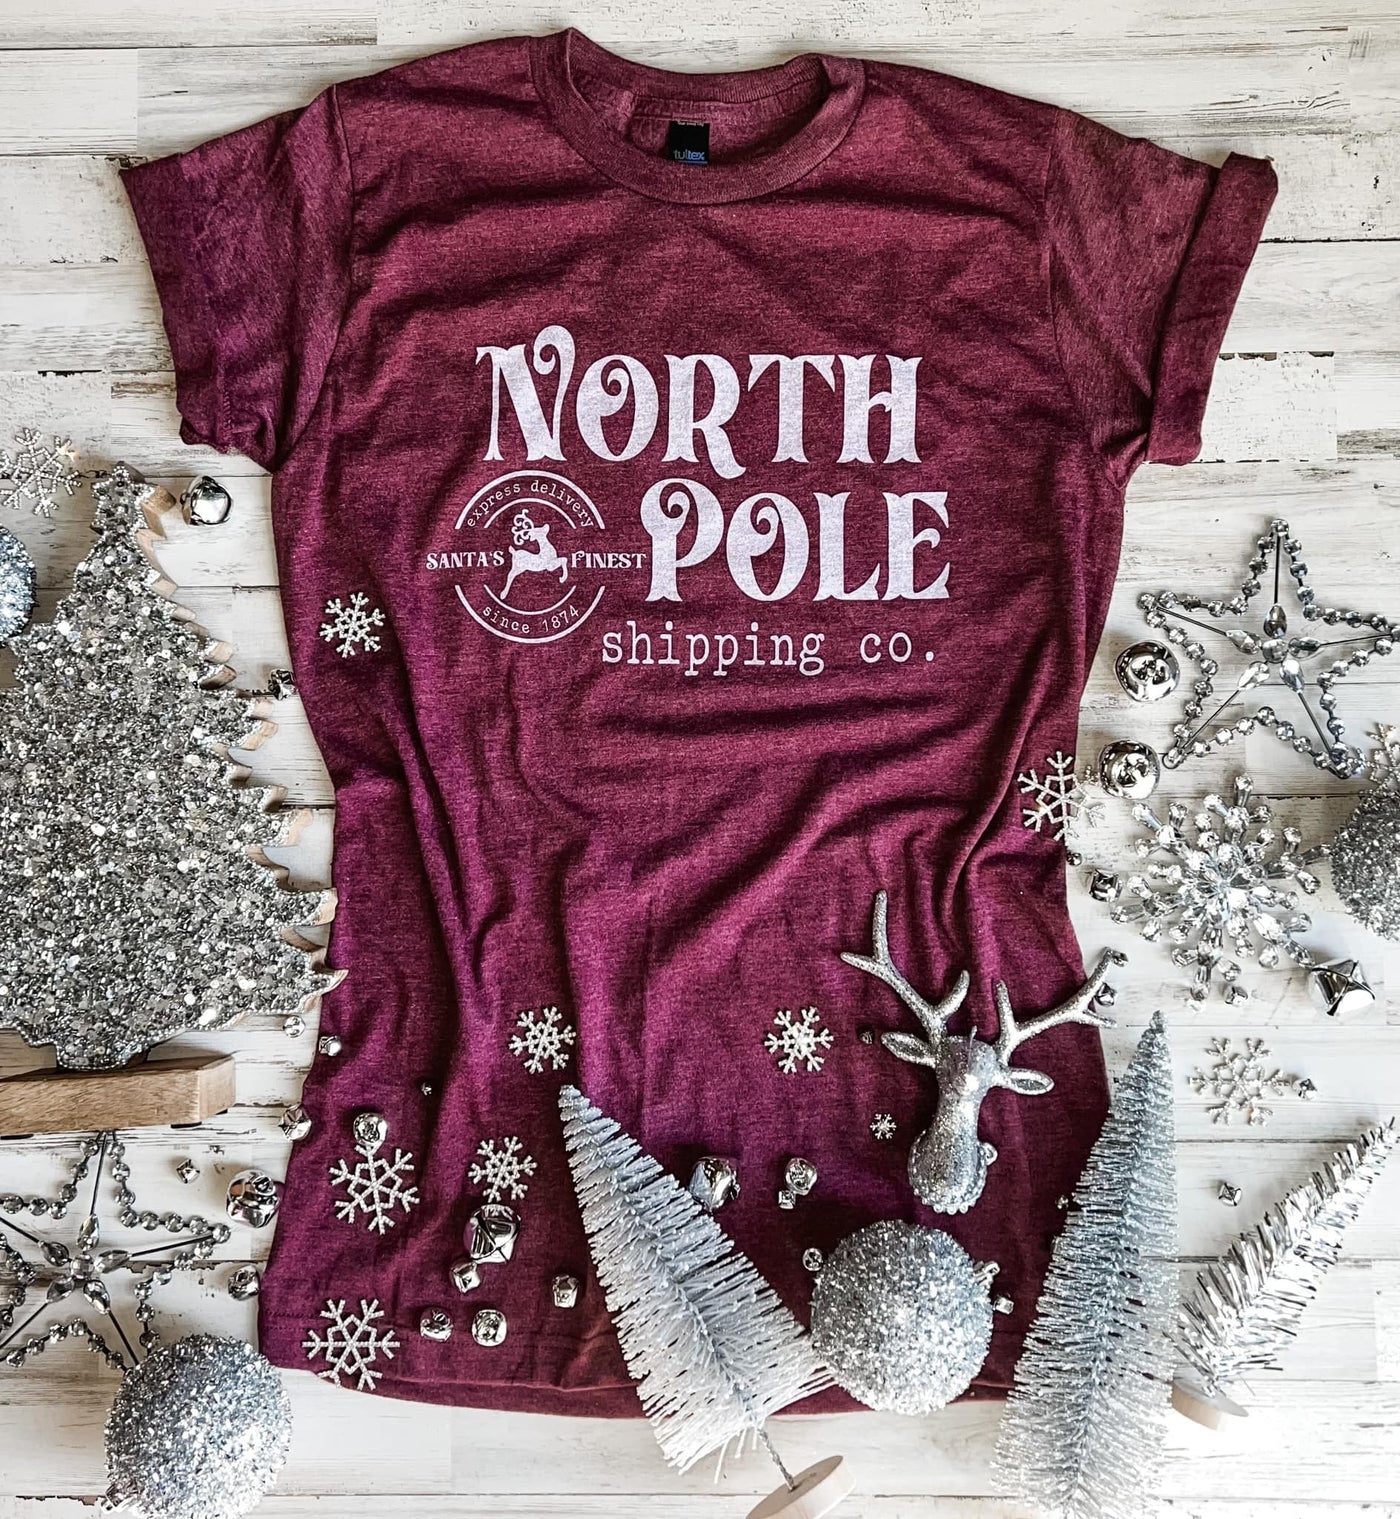 North Pole Shipping Co in Heather Burgundy